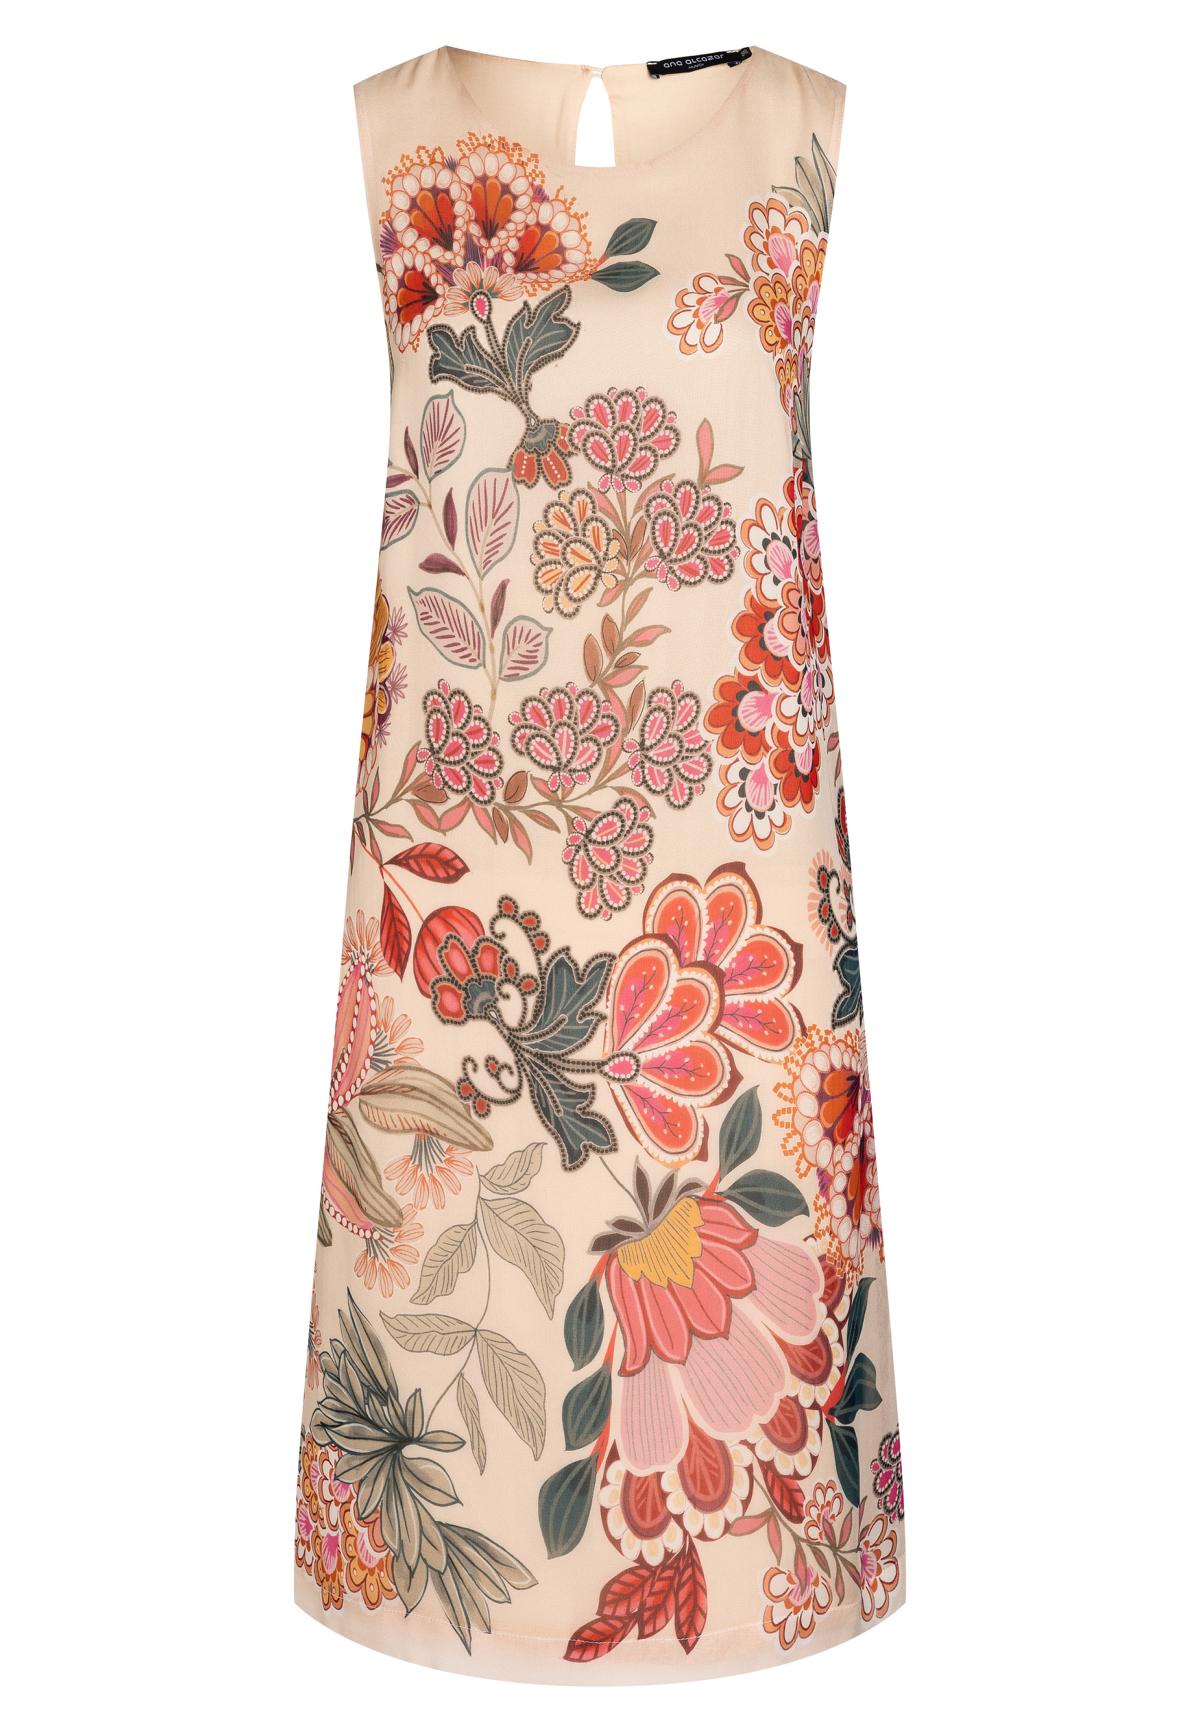 Simple sleeveless dress Cavos with flower-pattern in beige, red & green ...